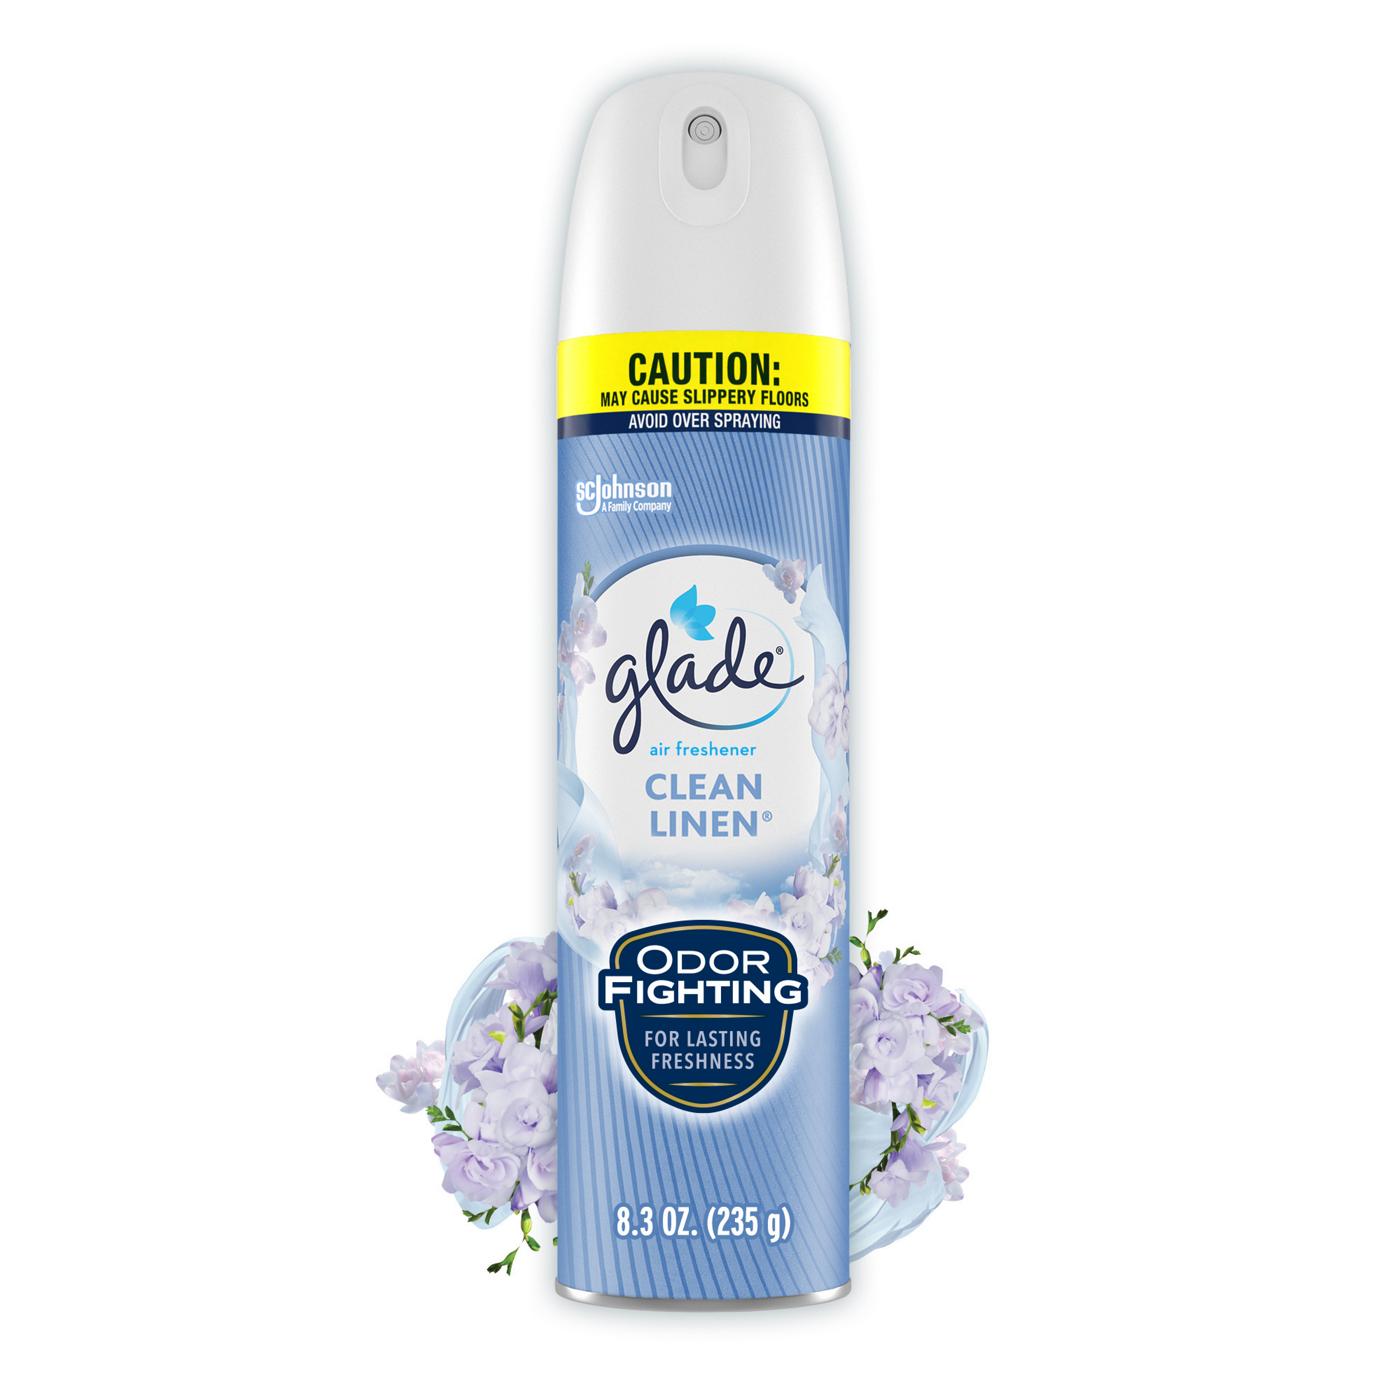 Glade Air Freshener Room Spray - Clean Linen; image 1 of 3